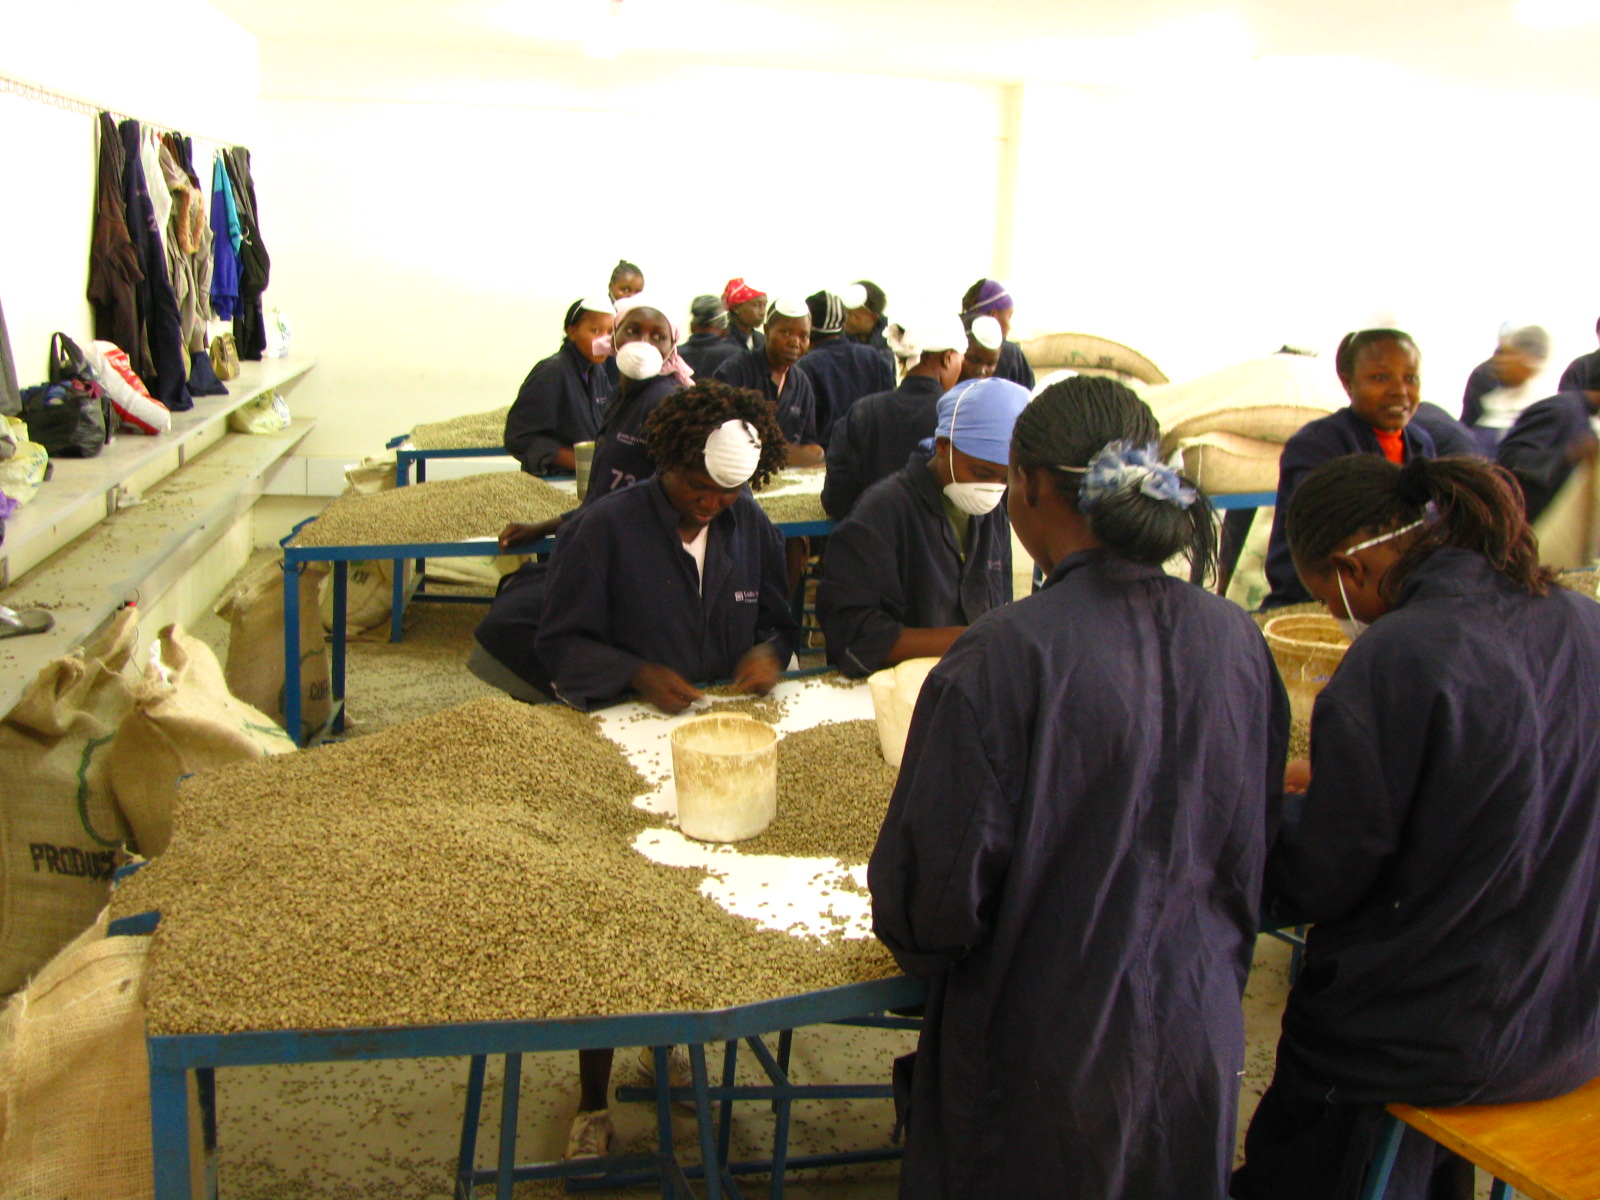 several women sit in front of bags of grain